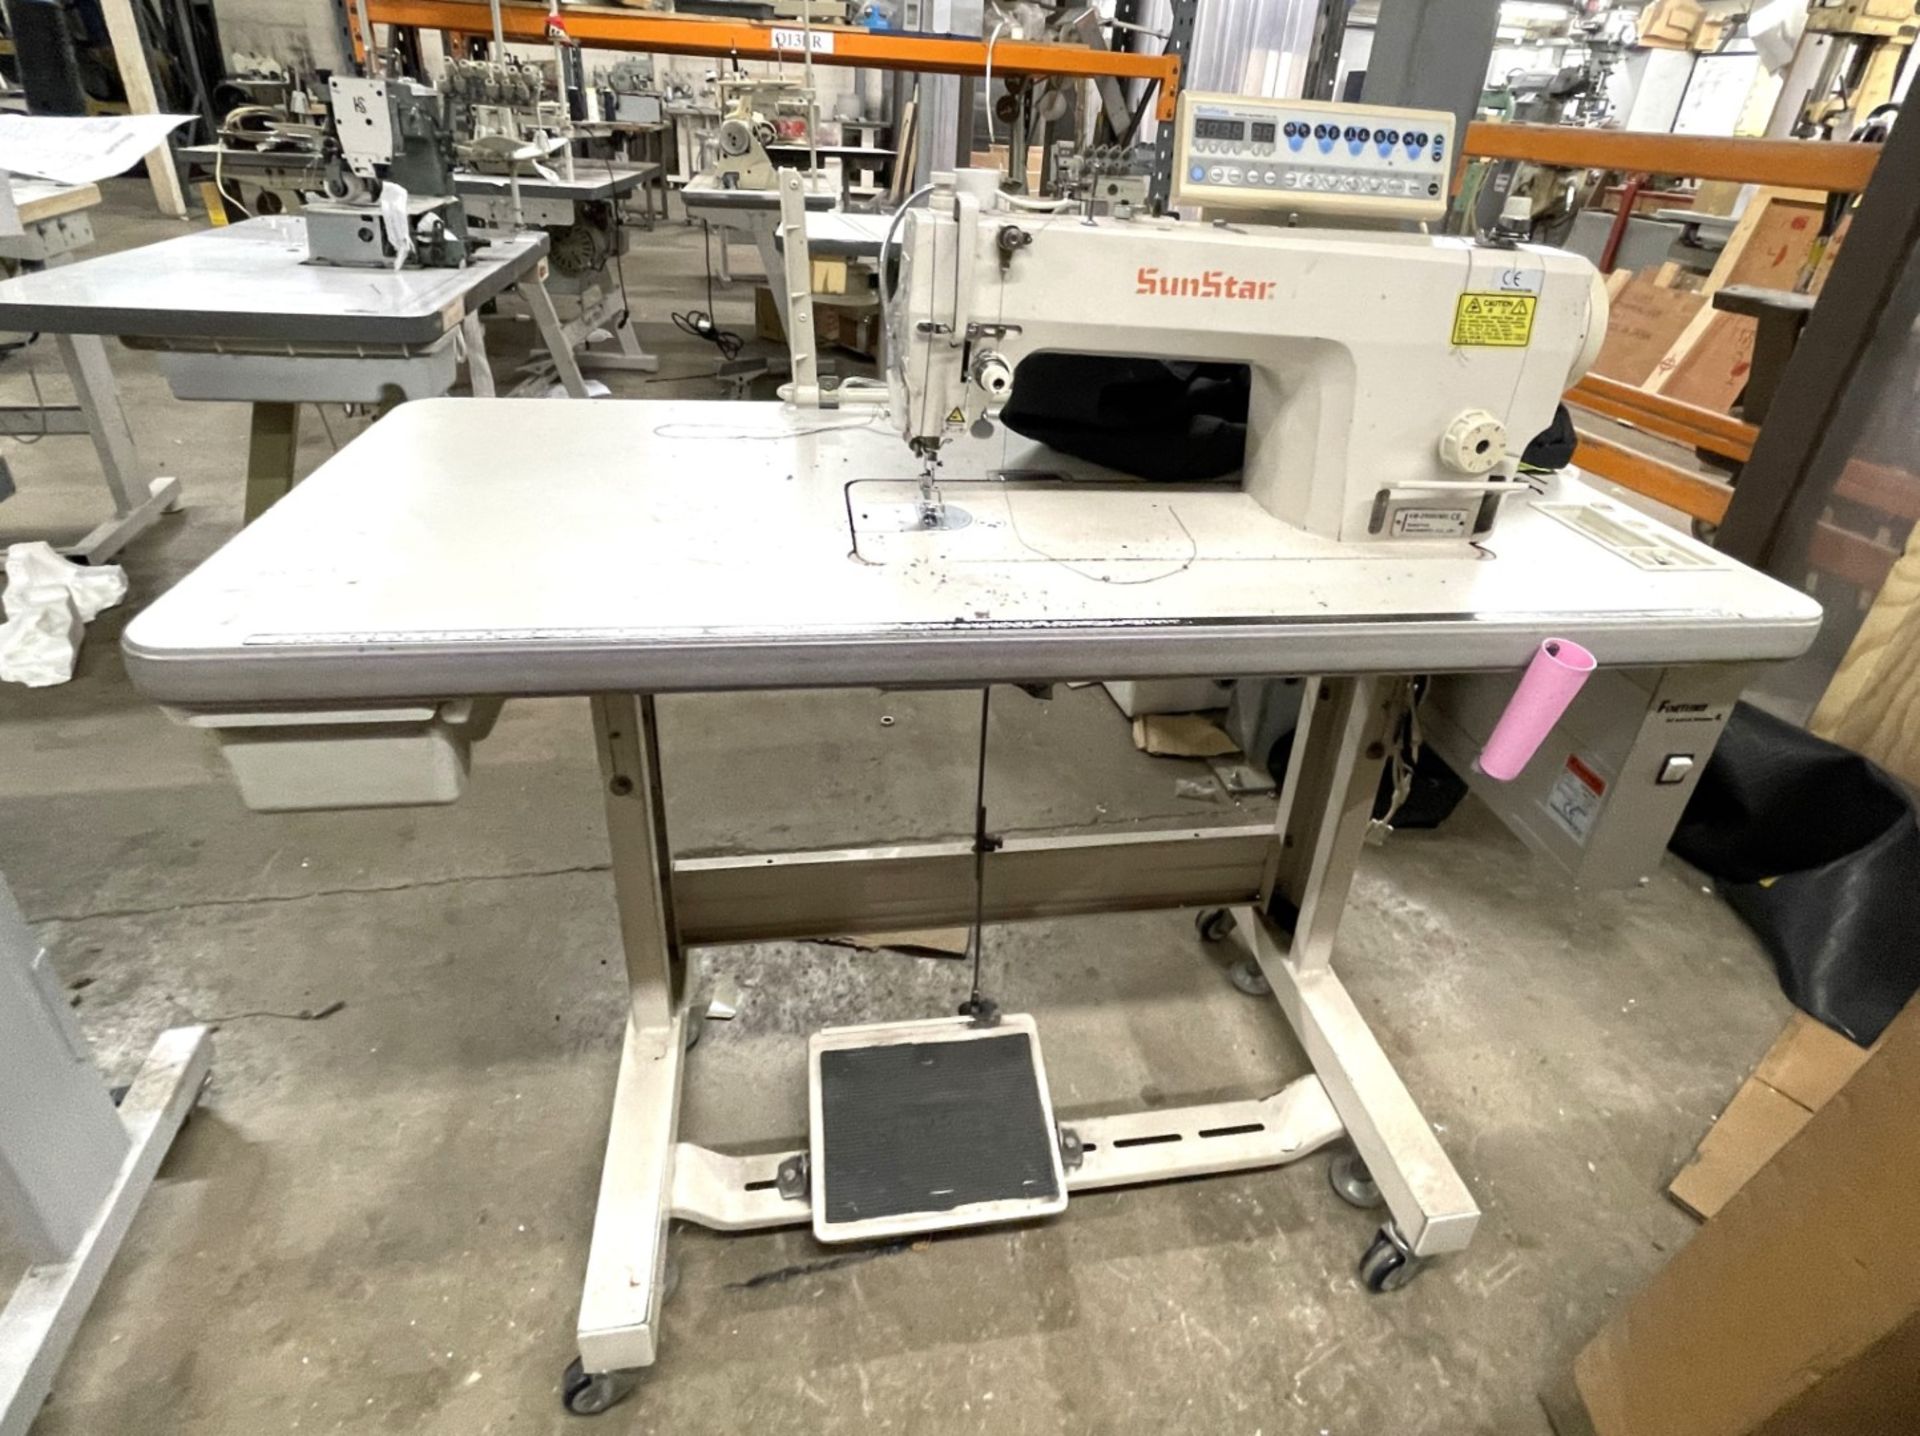 1 x Sunstar KM2300 UMG Single Needle Double Lockstitch Industrial Sewing Machine With Table - Image 2 of 24